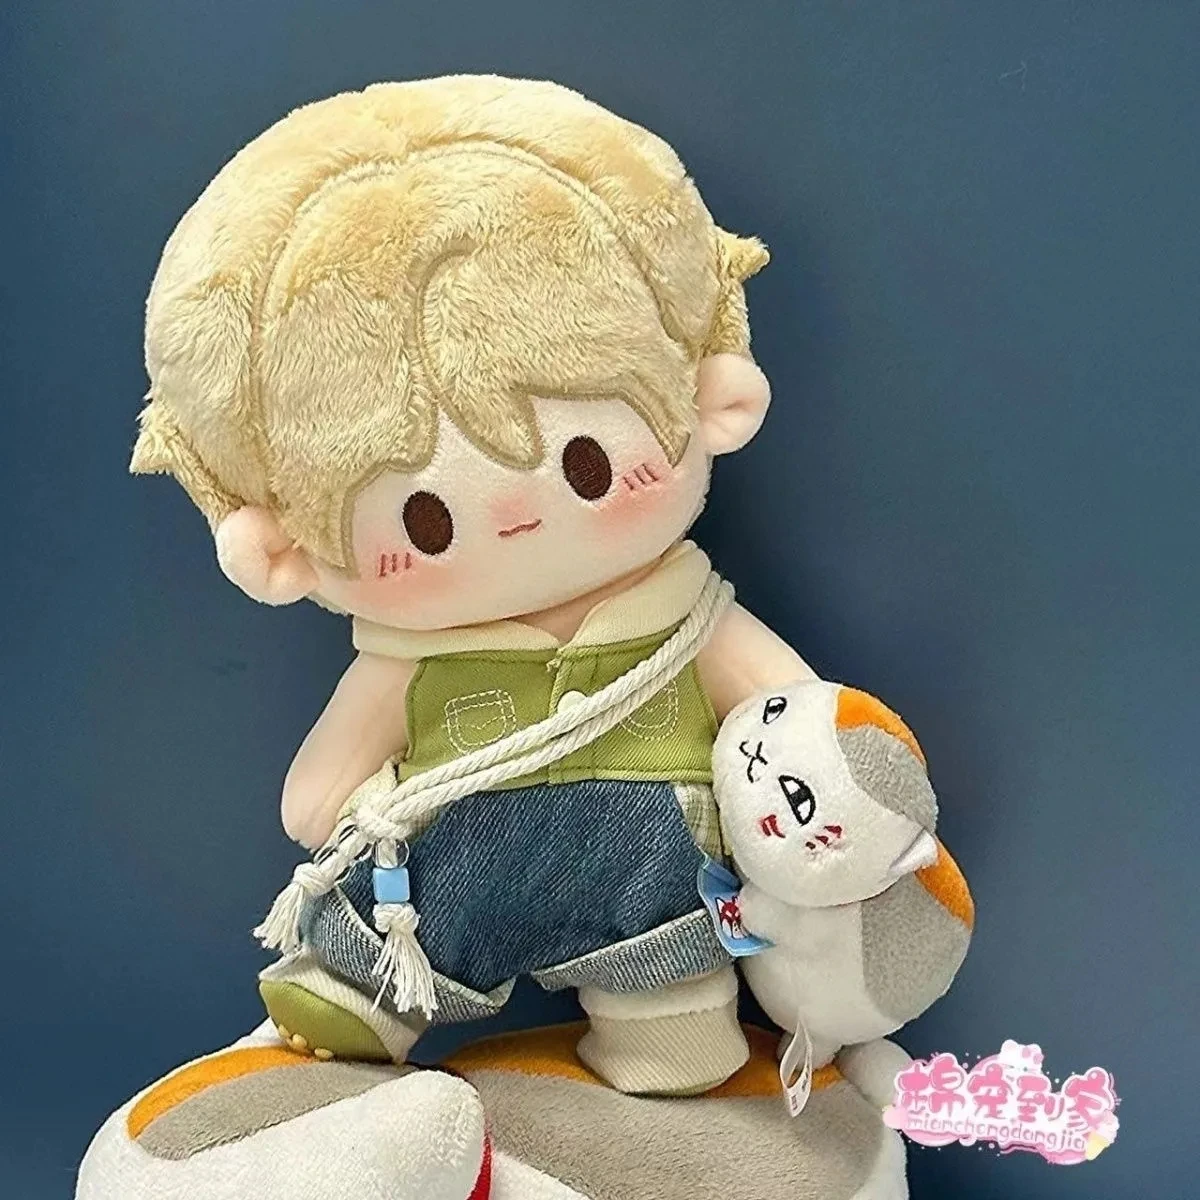 Anime Natsume's Book of Friends Natsume Takashi 20cm Plush Dolls Toy Nude Doll Plushie Cosplay a5837 Kids Gift the river cafe look book recipes for kids of all ages